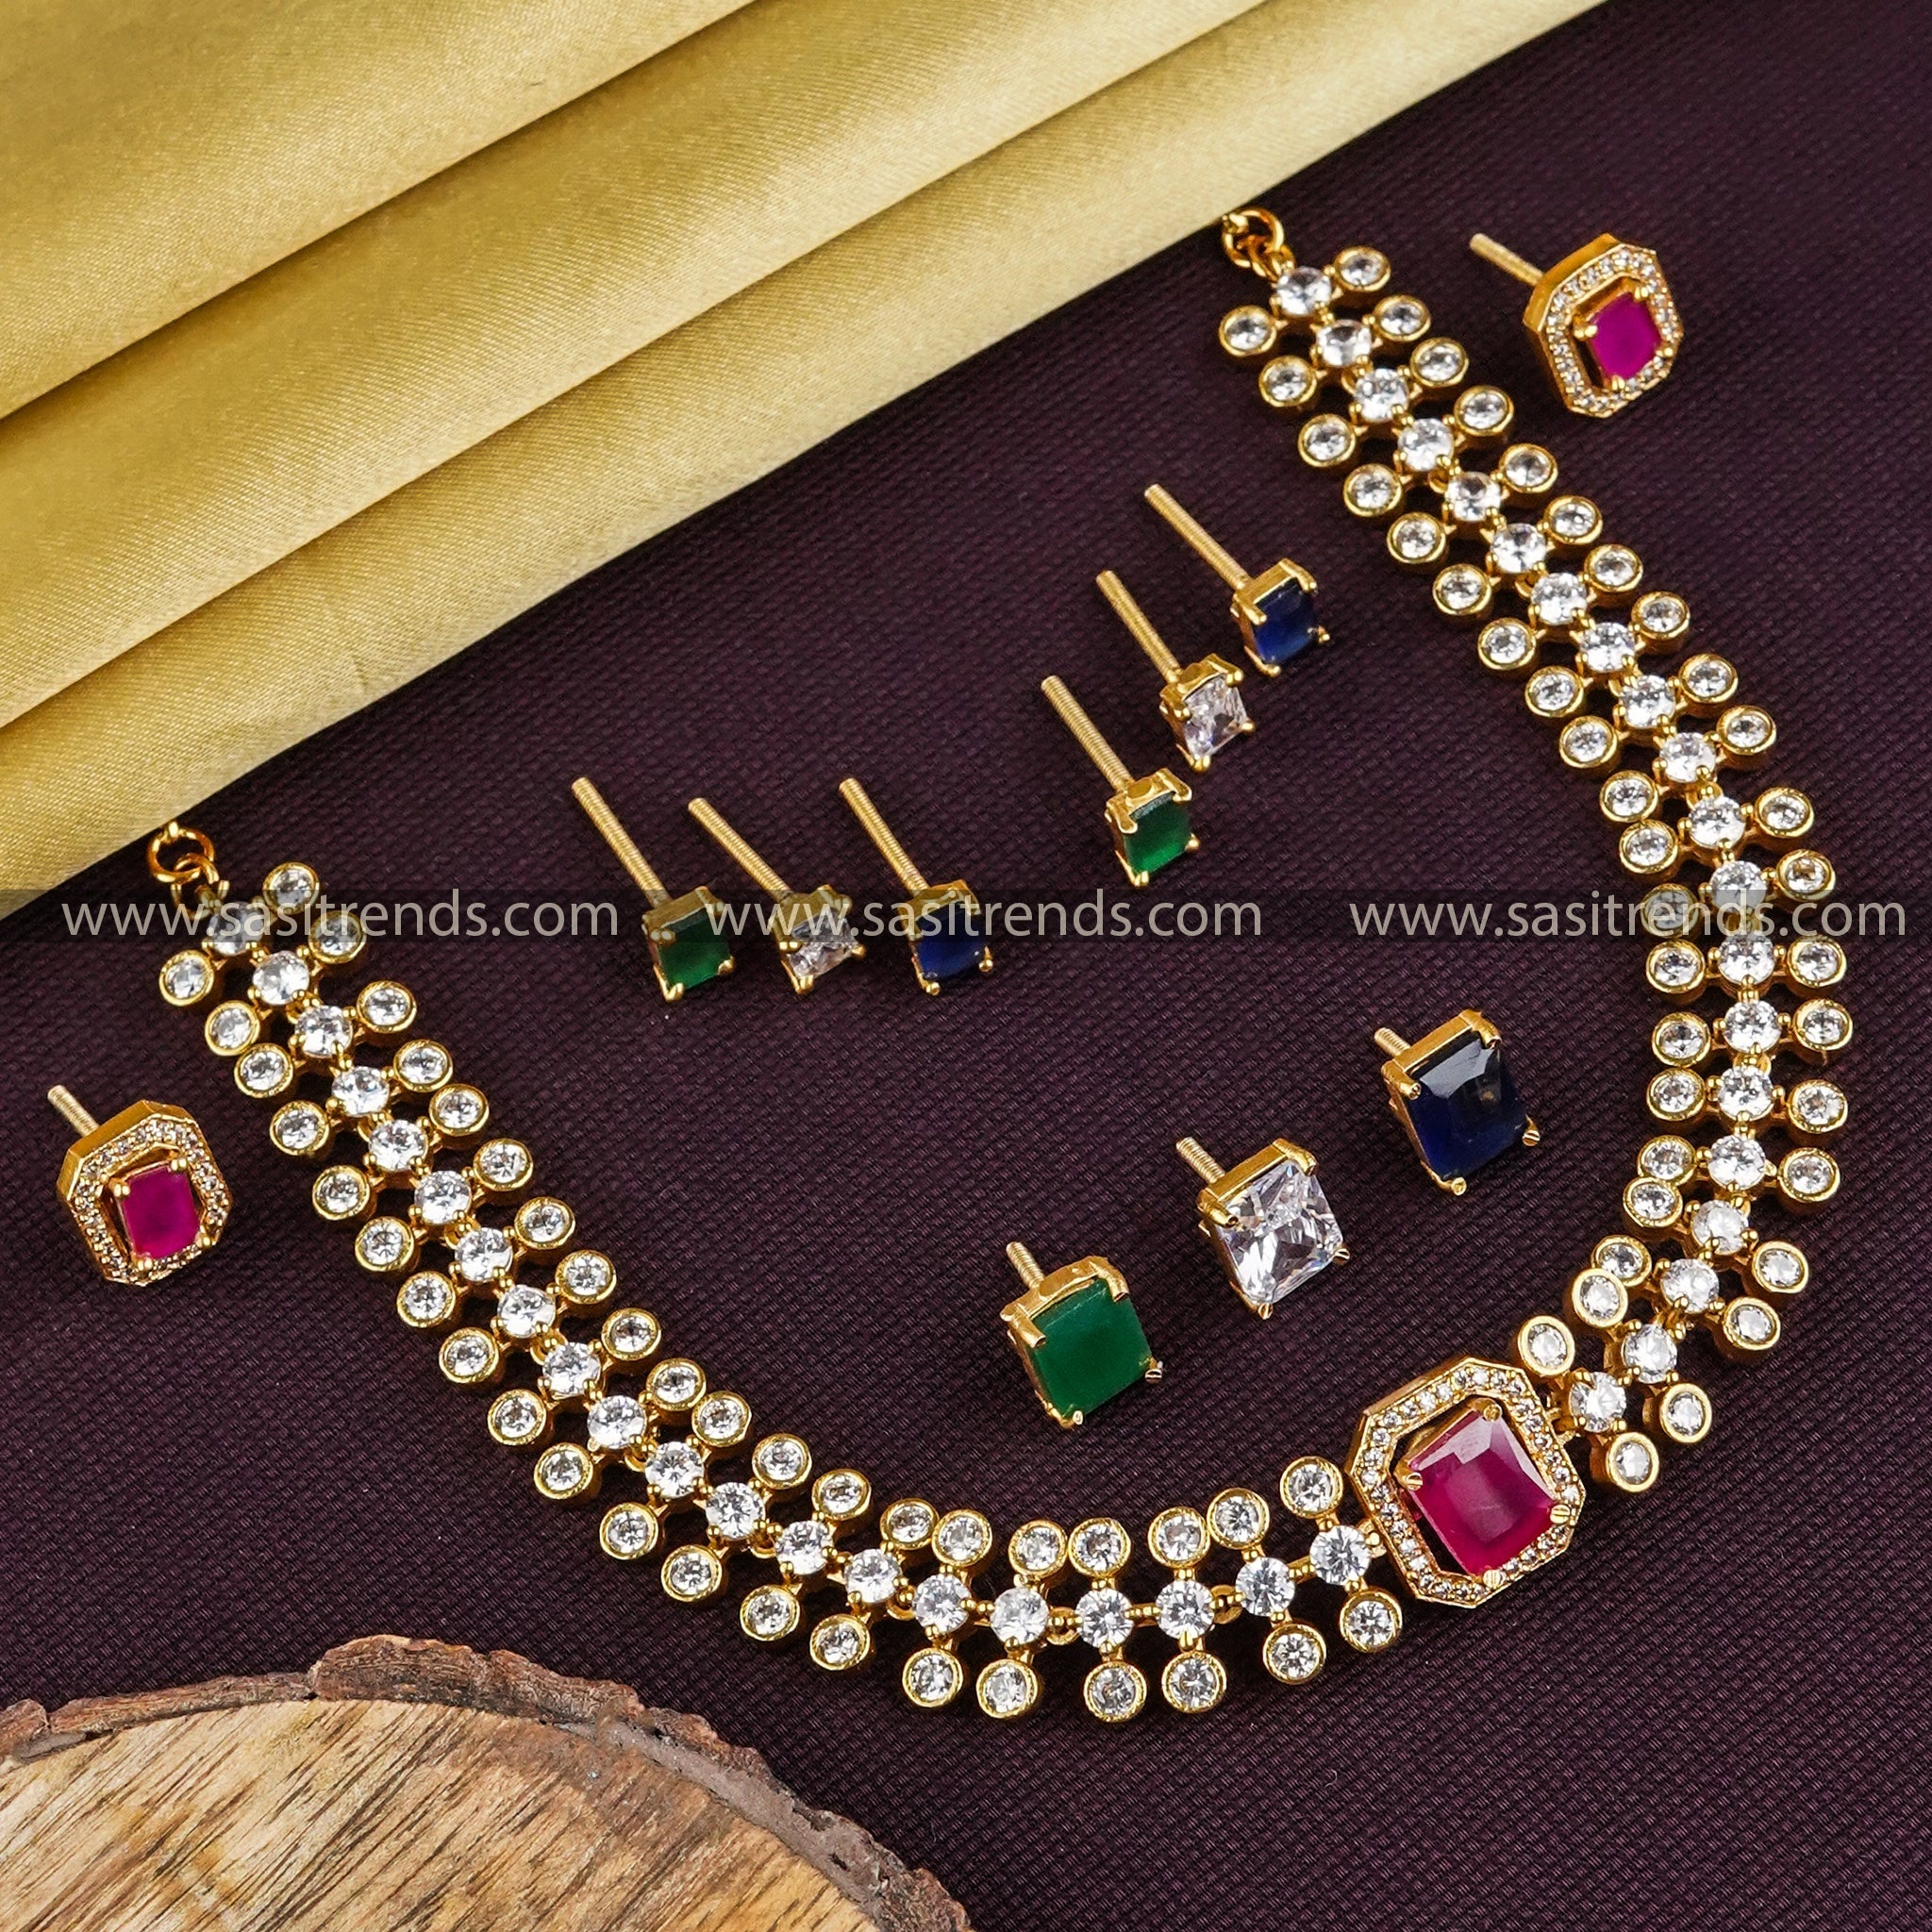 235-DN252 - 18K Gold 'Detachable - 3 In 1' Peacock Diamond Choker Necklace  with Color Stones & South Sea Pearls | Diamond choker necklace, Diamond  choker, Bridal diamond jewellery